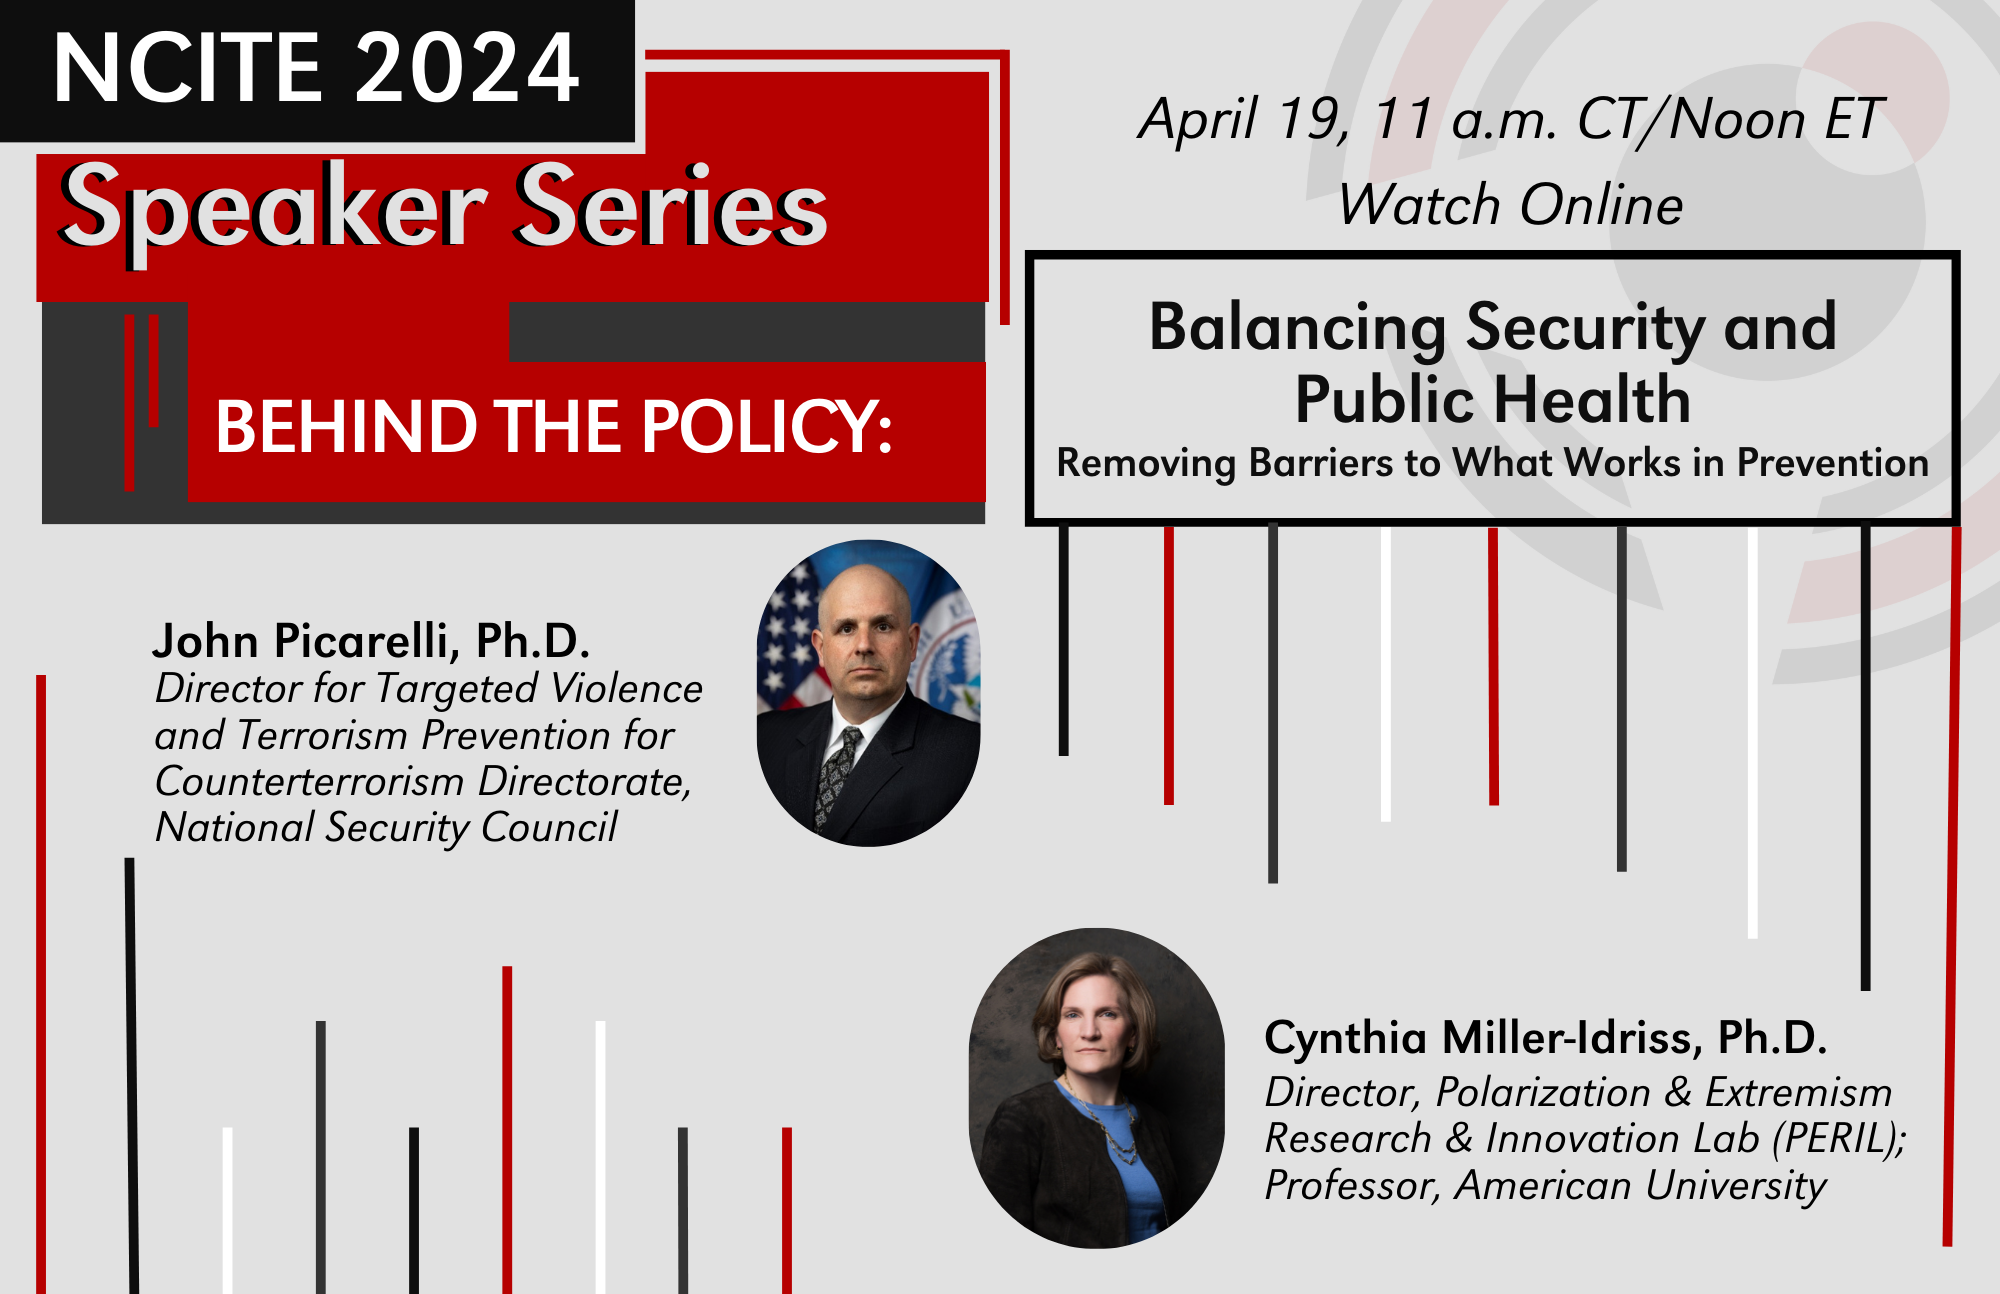 Text on the image includes "NCITE 2024," "Speaker Series Behind the Policy:" "April 19, 11 a.m. CT/Noon ET," "Watch Online," "Balancing Security and Public Health," "Removing Barriers to What Works in Prevention," with headshots of the two panelists next to their names and titles which read, "John Picarelli, Ph.D.," and "Cynthia Miller-Idriss, Ph.D."